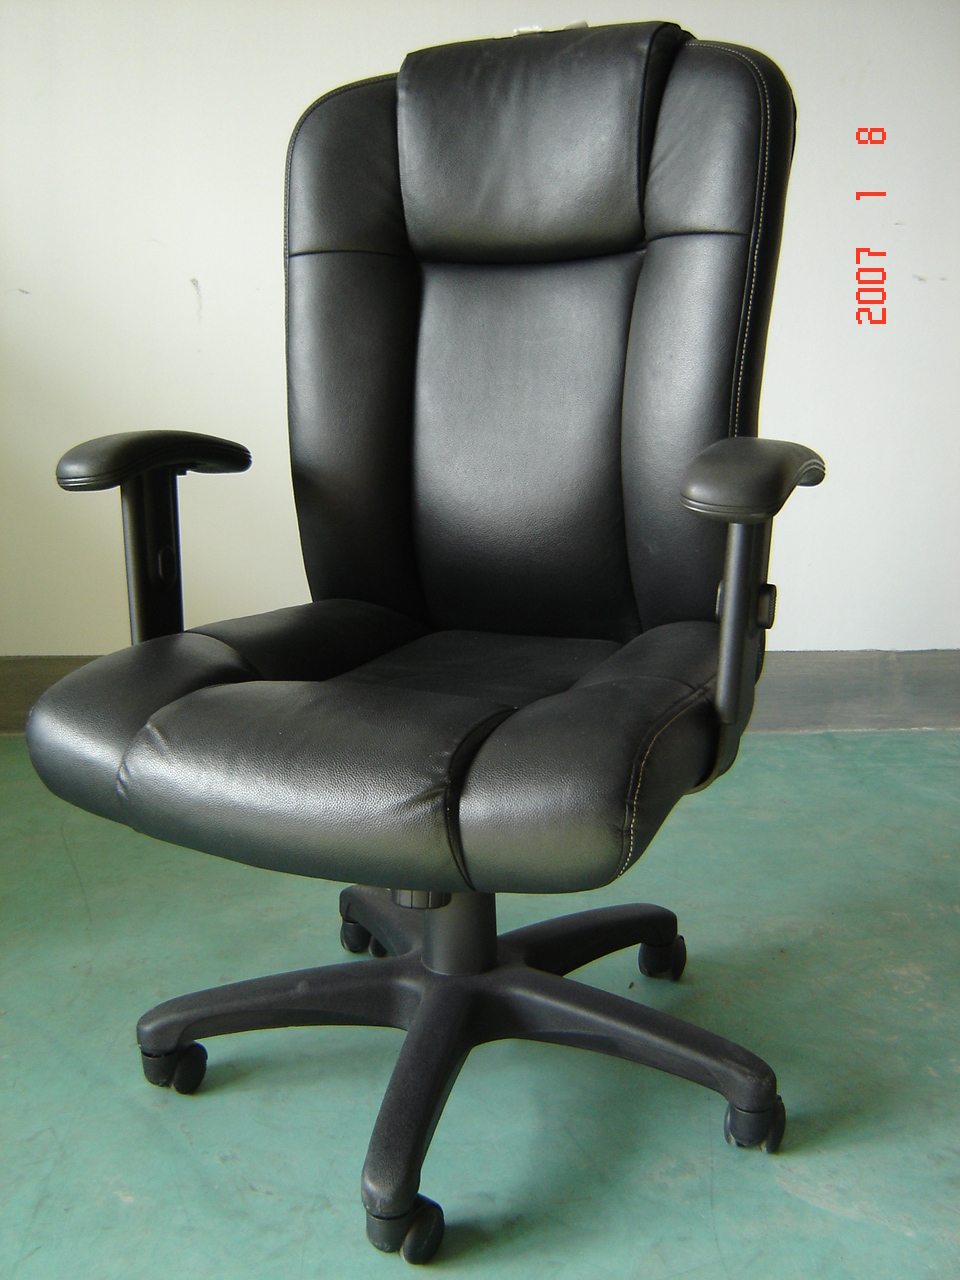 leather executive chair